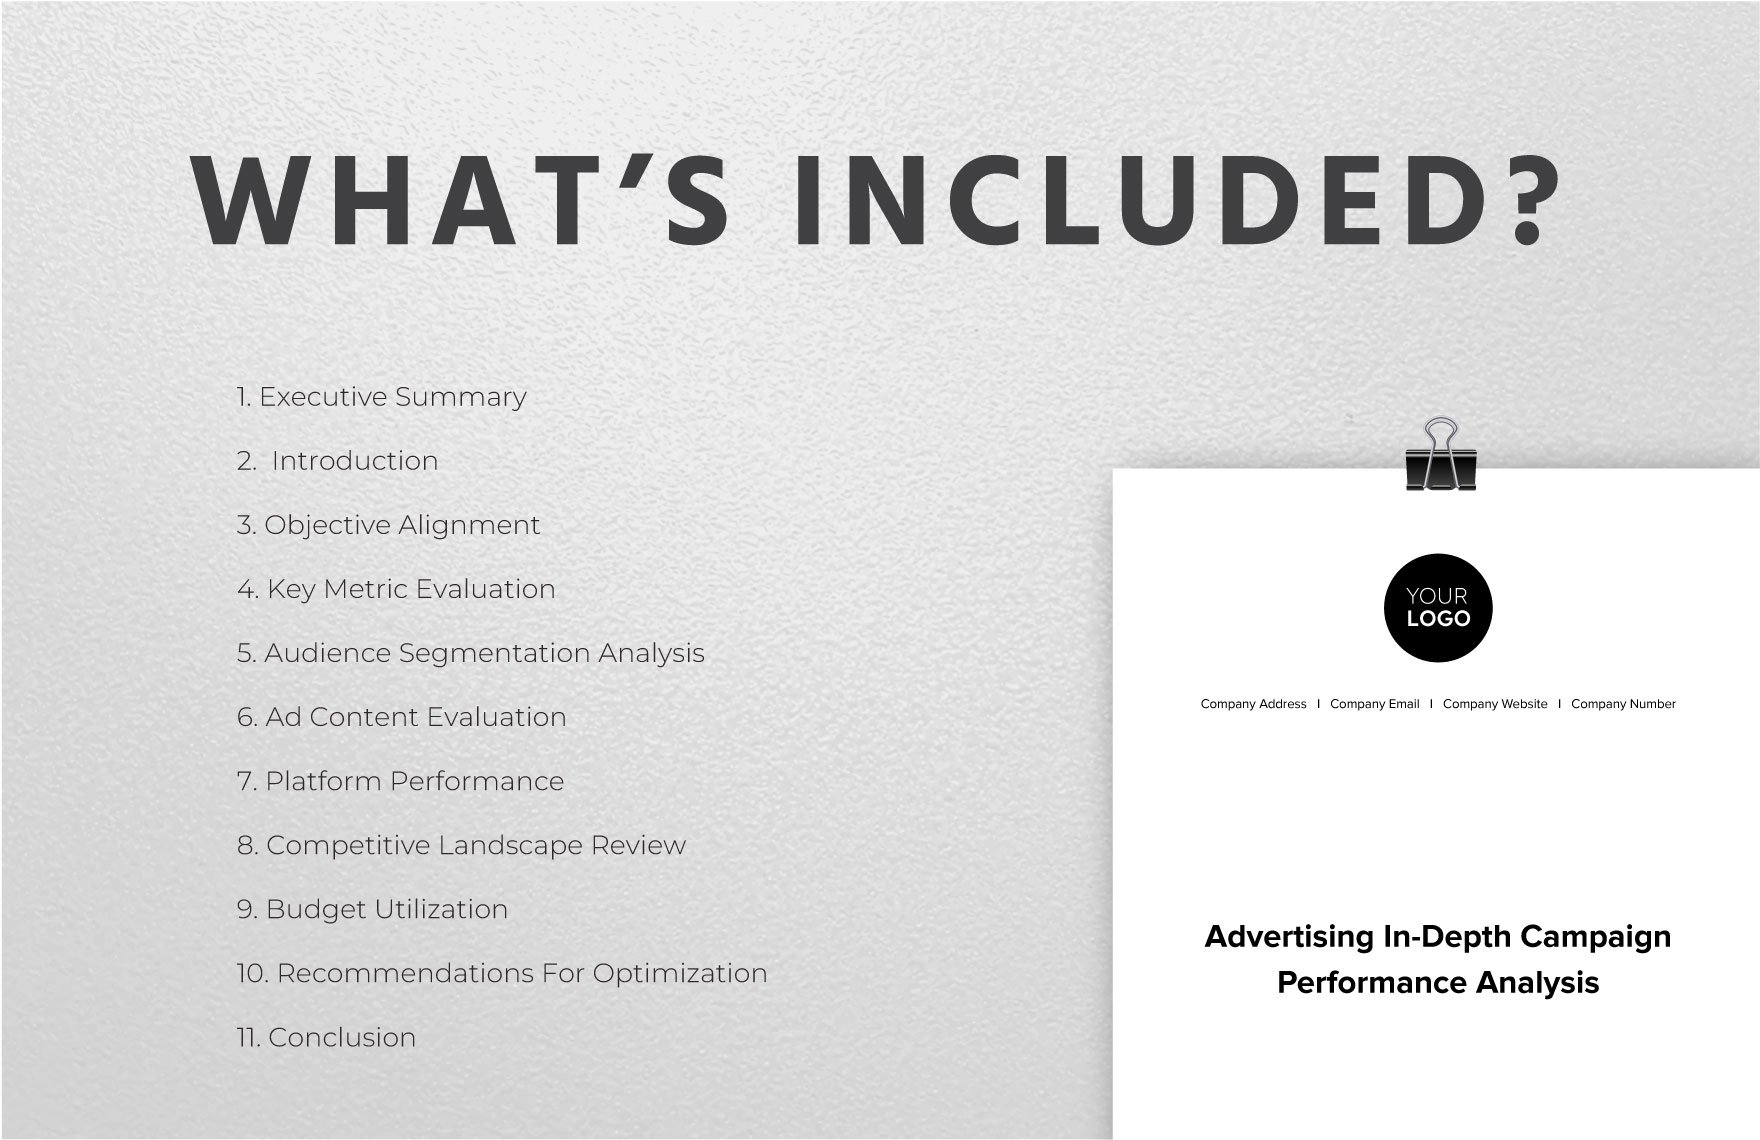 Advertising In-depth Campaign Performance Analysis Template